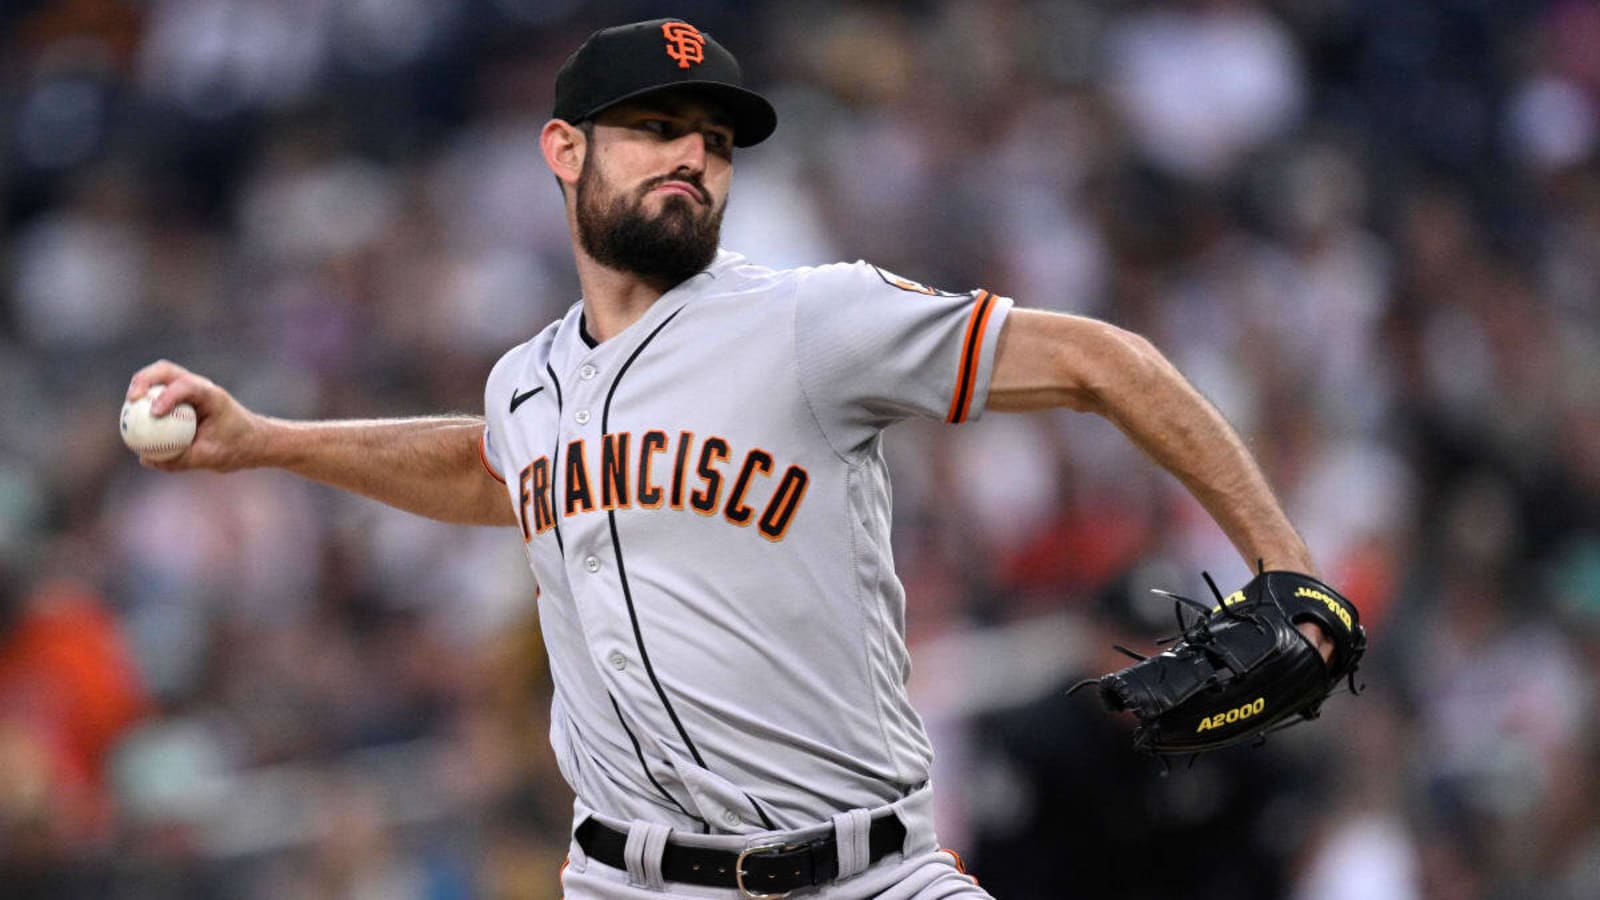 Tristan Beck gets crushed in  Giants 7-3 loss to Padres